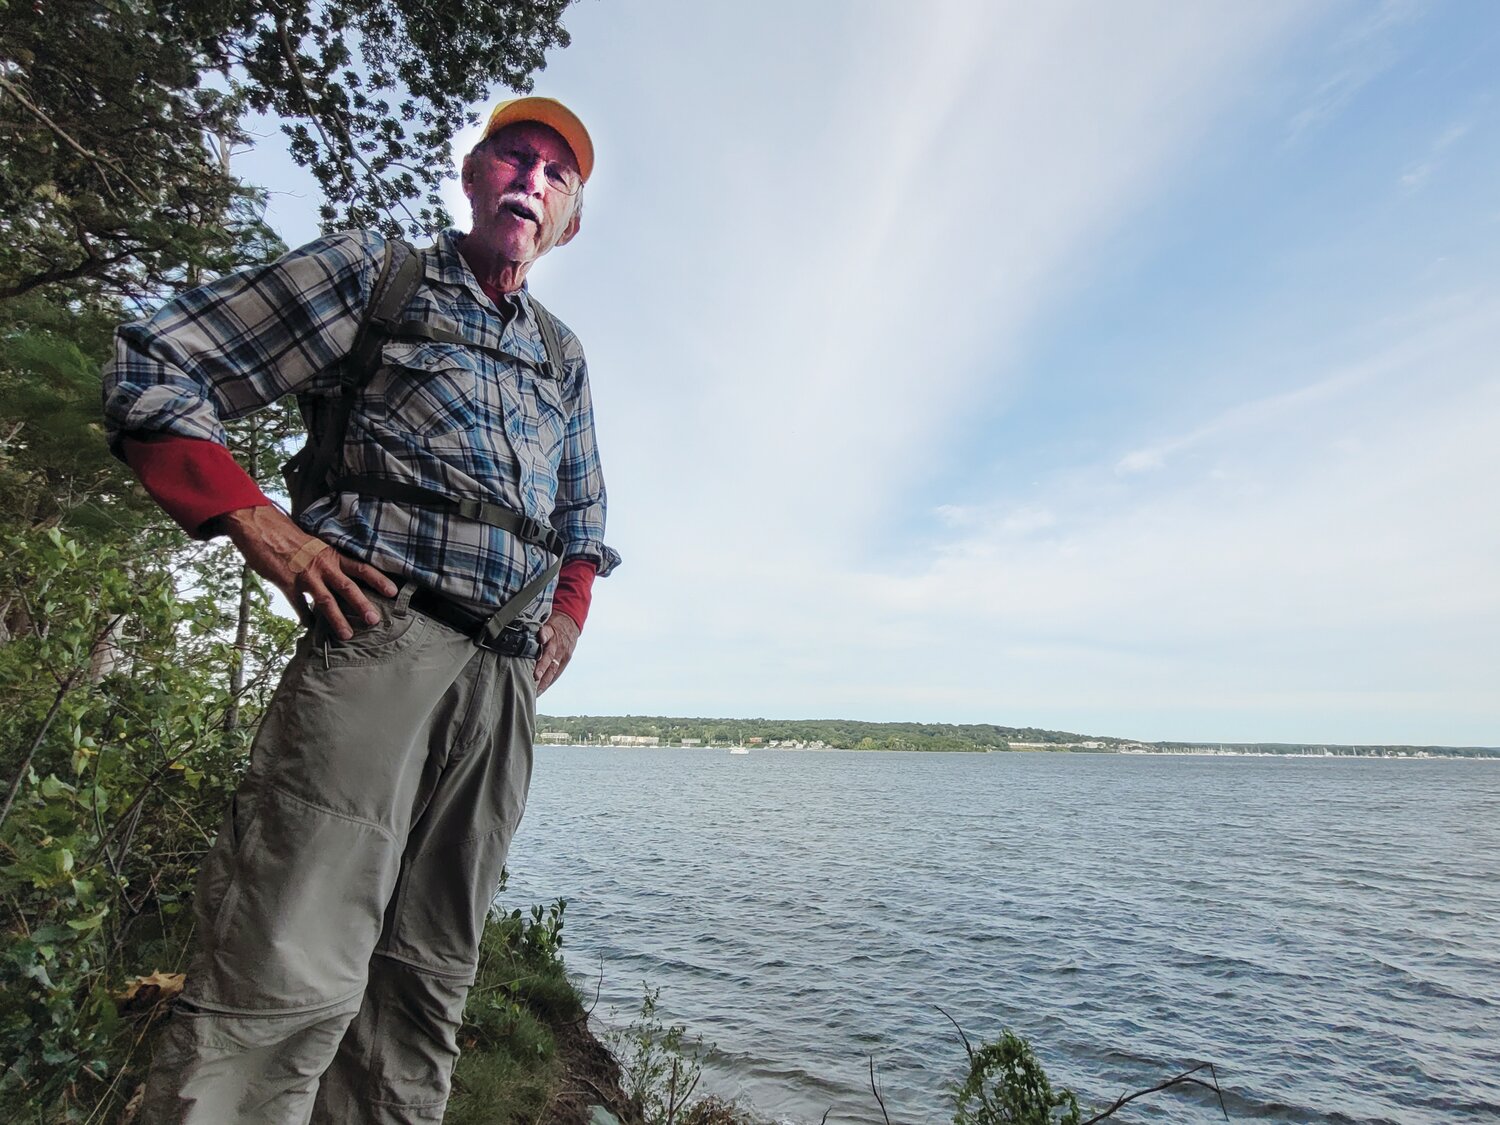 TAKE A HIKE: Retired journalist John Kostrzewa reignited his love for hiking his adopted state. After nearly 3 decades in The Providence Journal newsroom, he decided it was time to take a walk and think about the future. Eventually, his journey led him to his book, “Walking Rhode Island.”